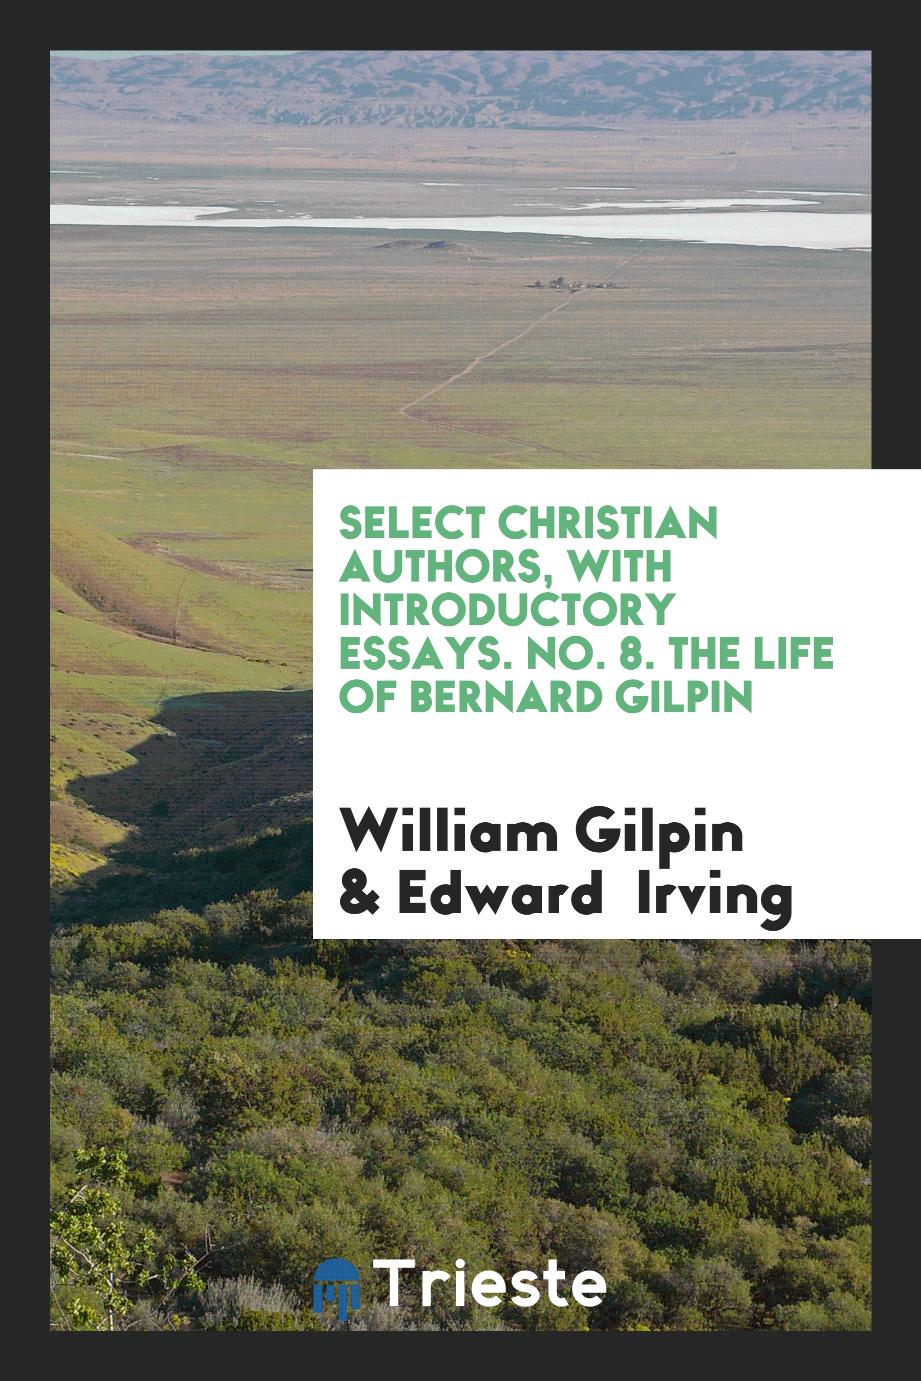 Select Christian Authors, with Introductory Essays. No. 8. The Life of Bernard Gilpin